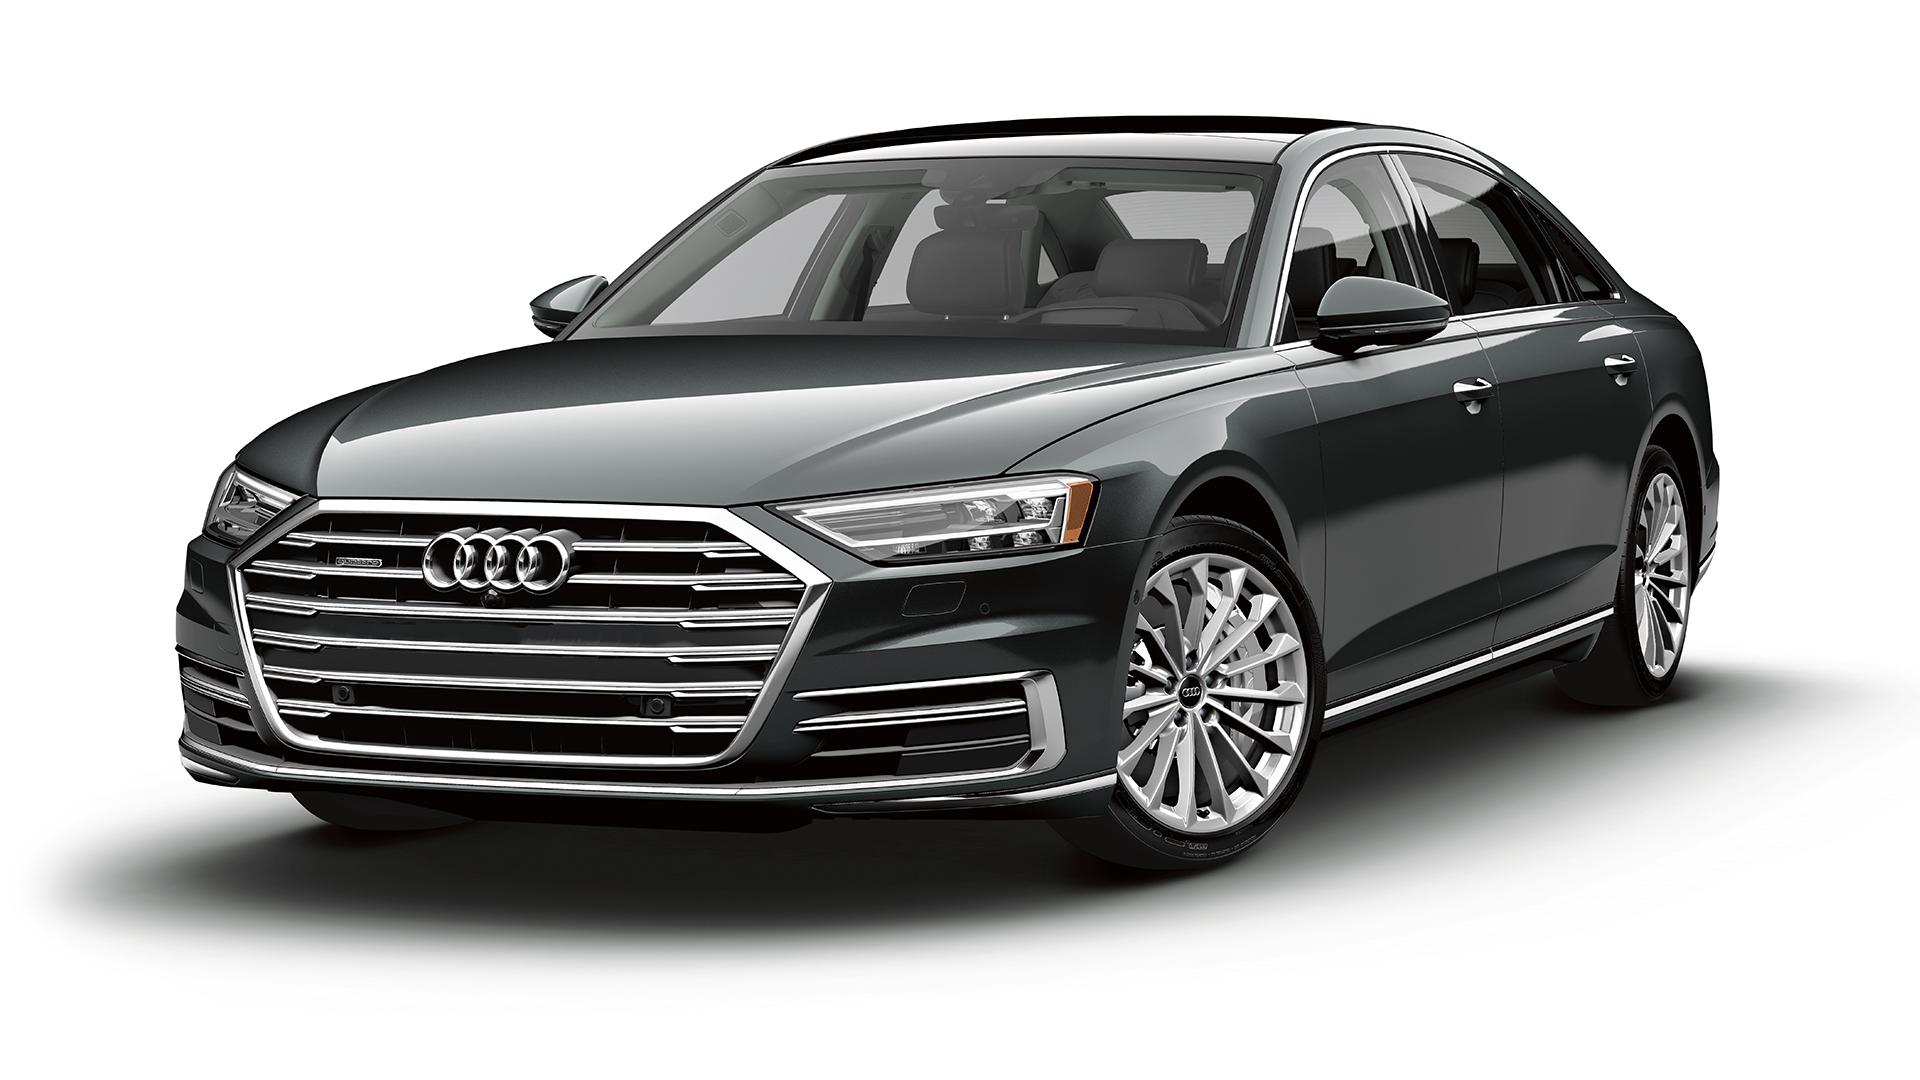 Audi A8. Equipped to exceed